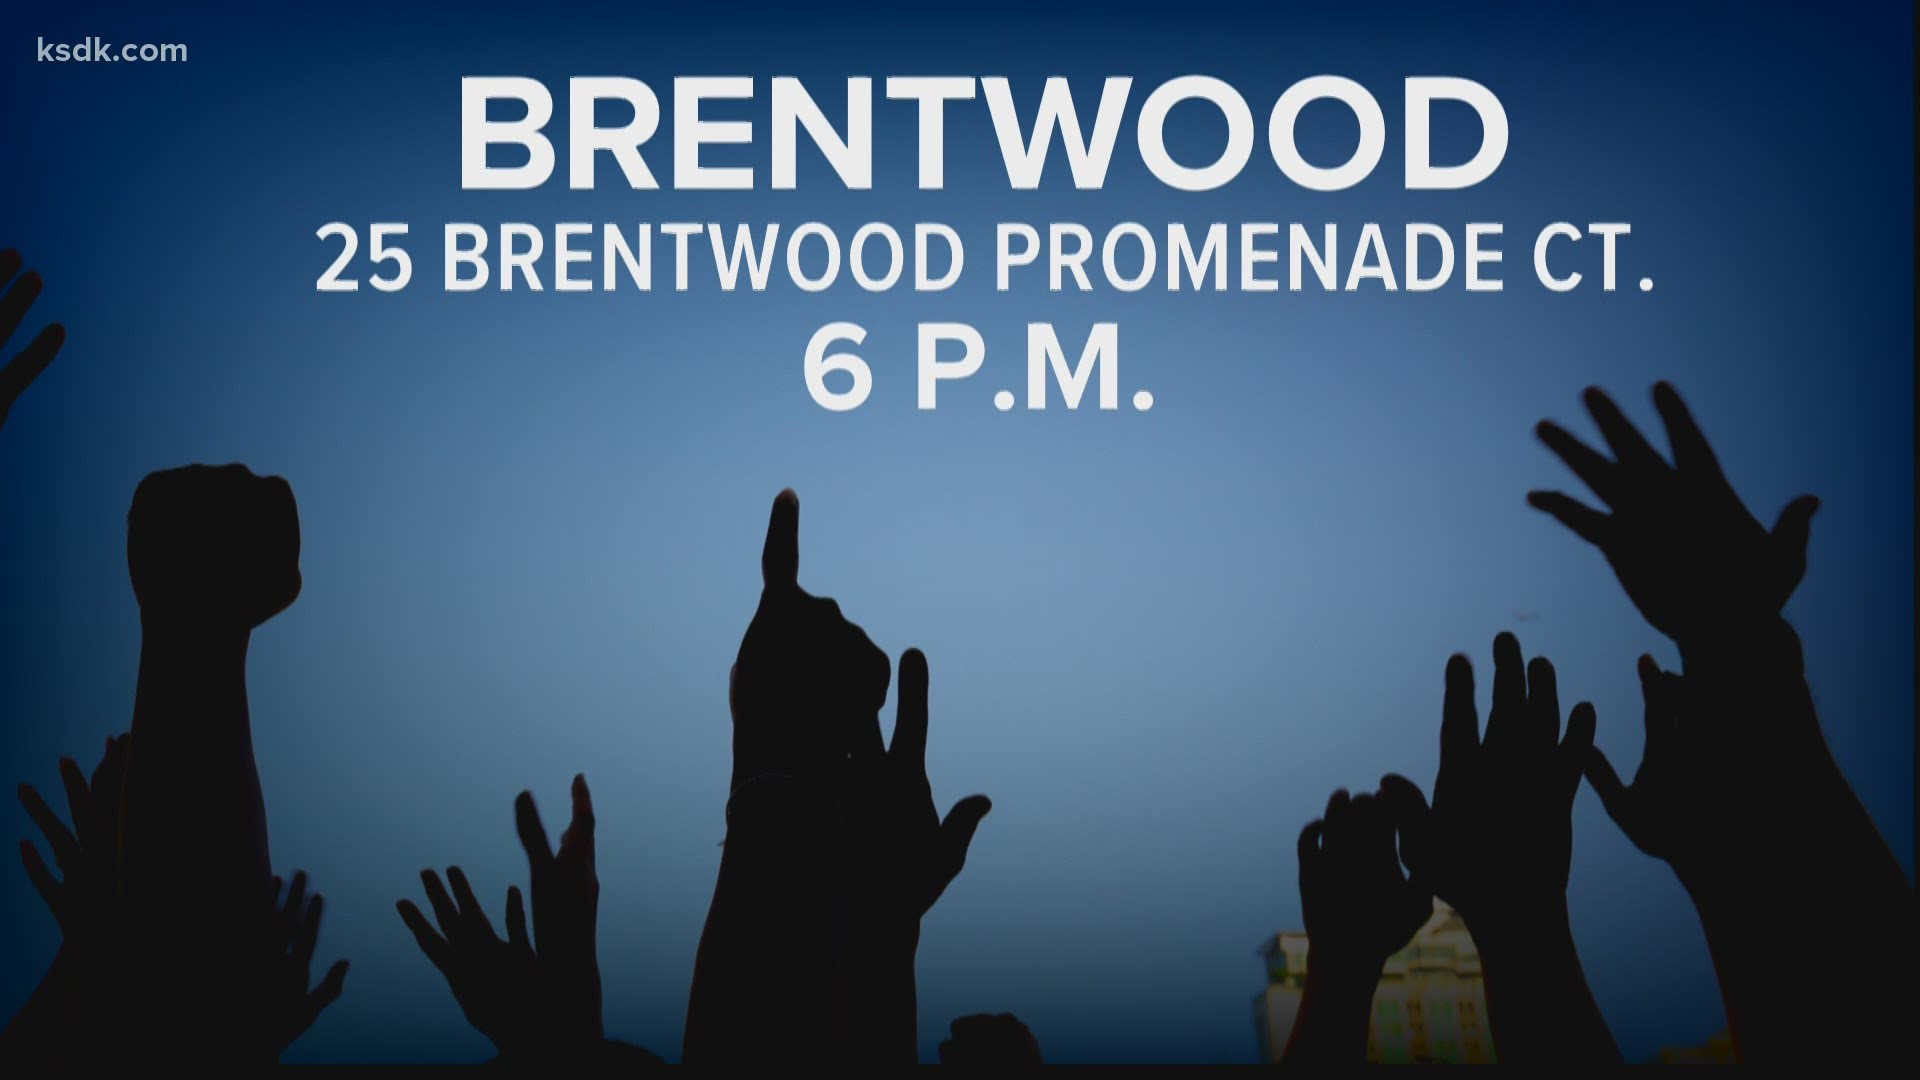 The protest begins 6 p.m. Thursday at The Promenade at Brentwood.